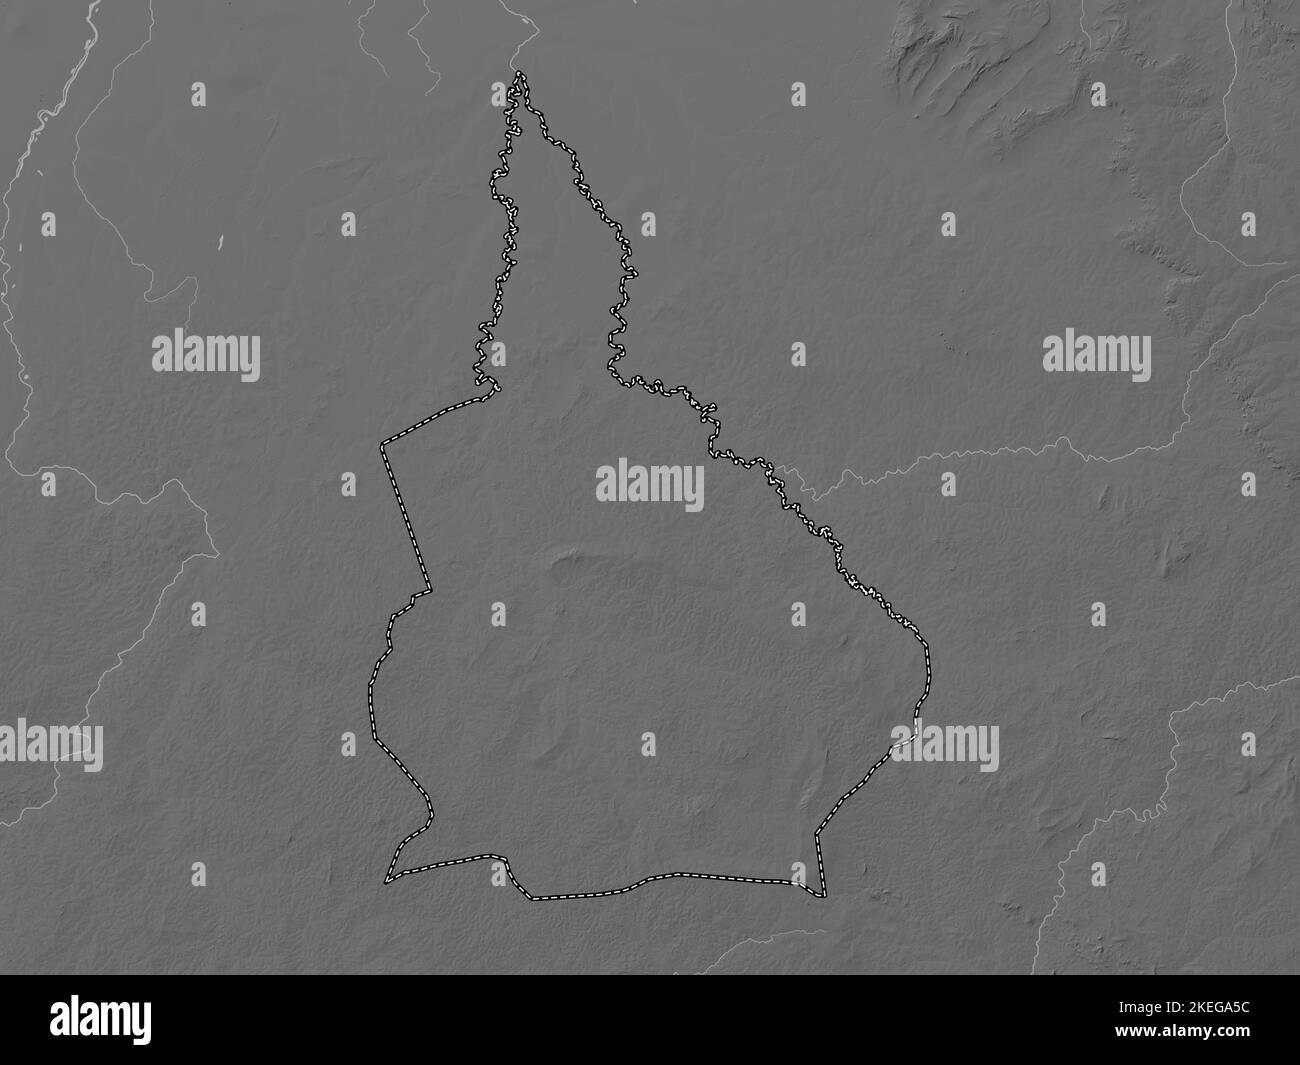 Nana-Grebizi, economic prefecture of Central African Republic. Grayscale elevation map with lakes and rivers Stock Photo